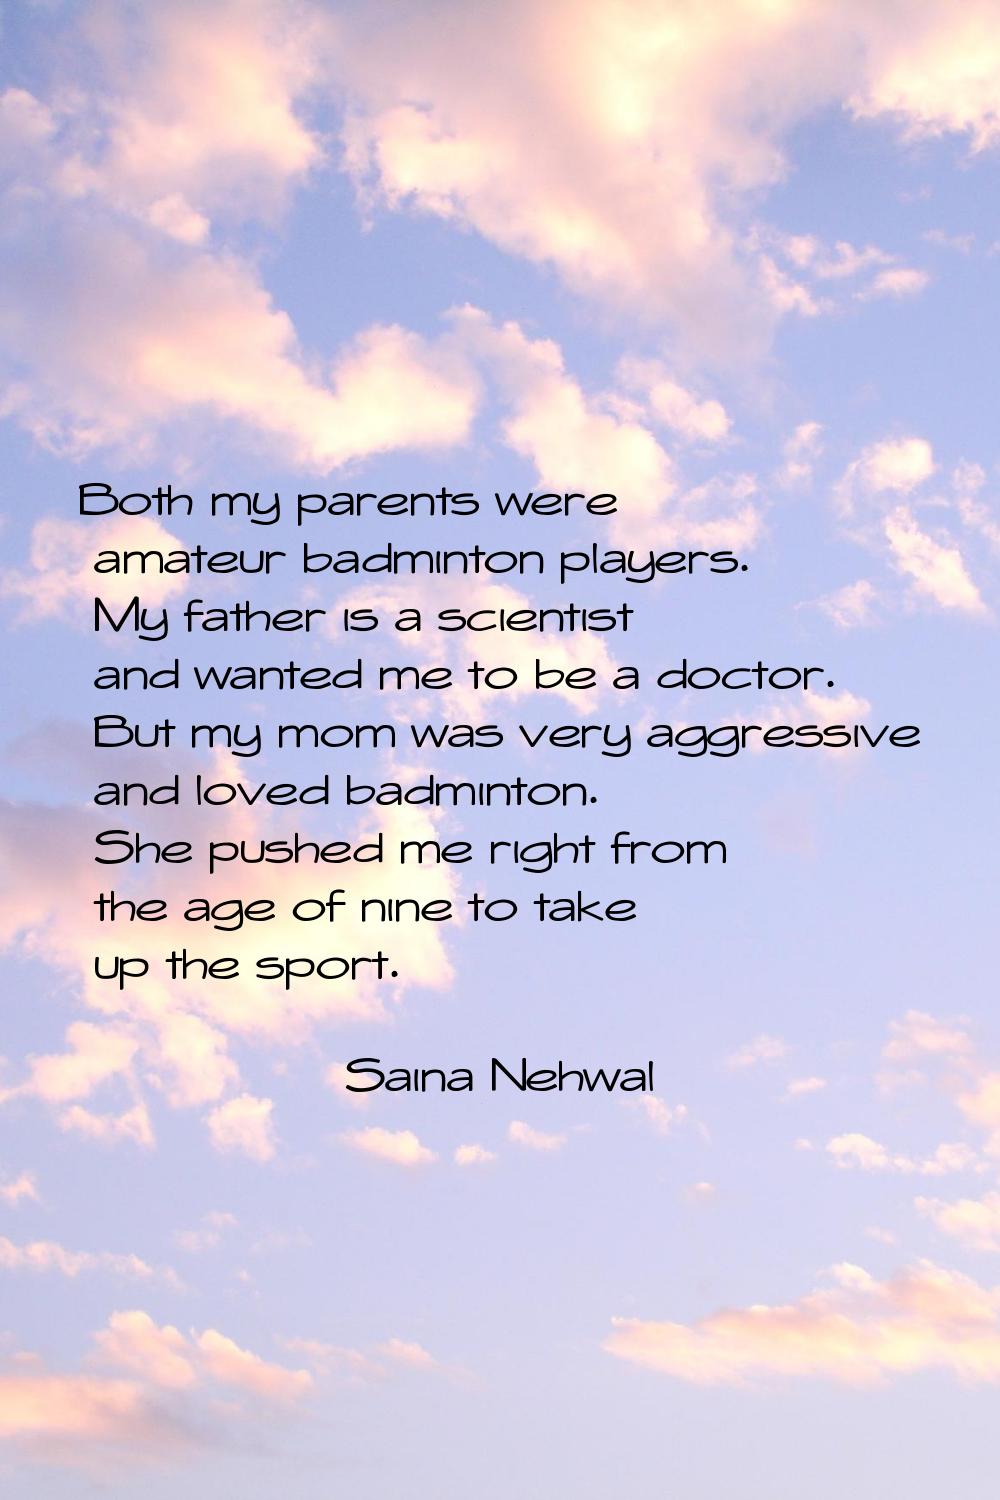 Both my parents were amateur badminton players. My father is a scientist and wanted me to be a doct